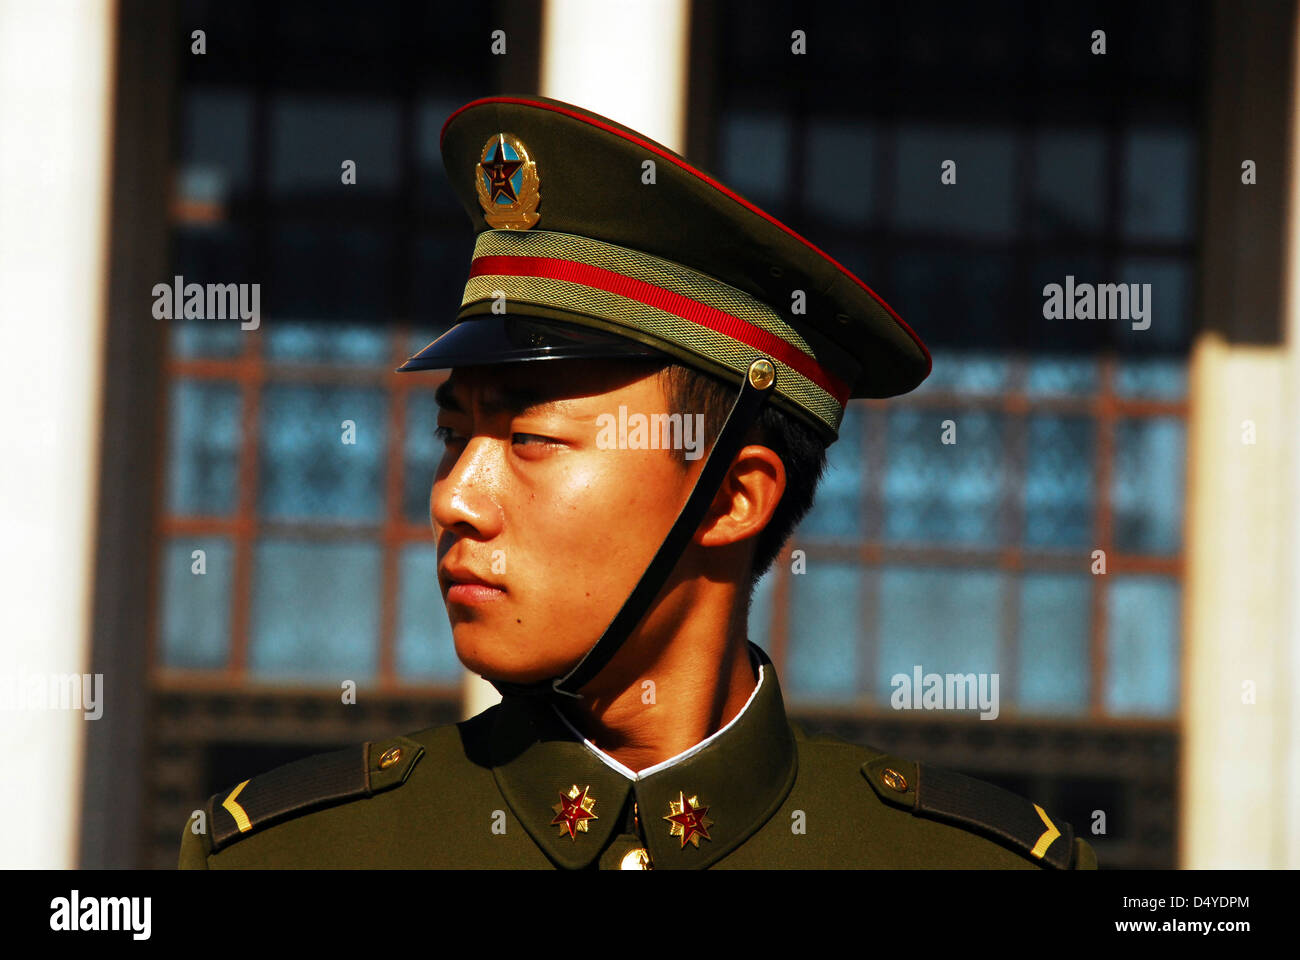 China, Beijing, close-up of a Chinese guard in military uniform Stock Photo  - Alamy